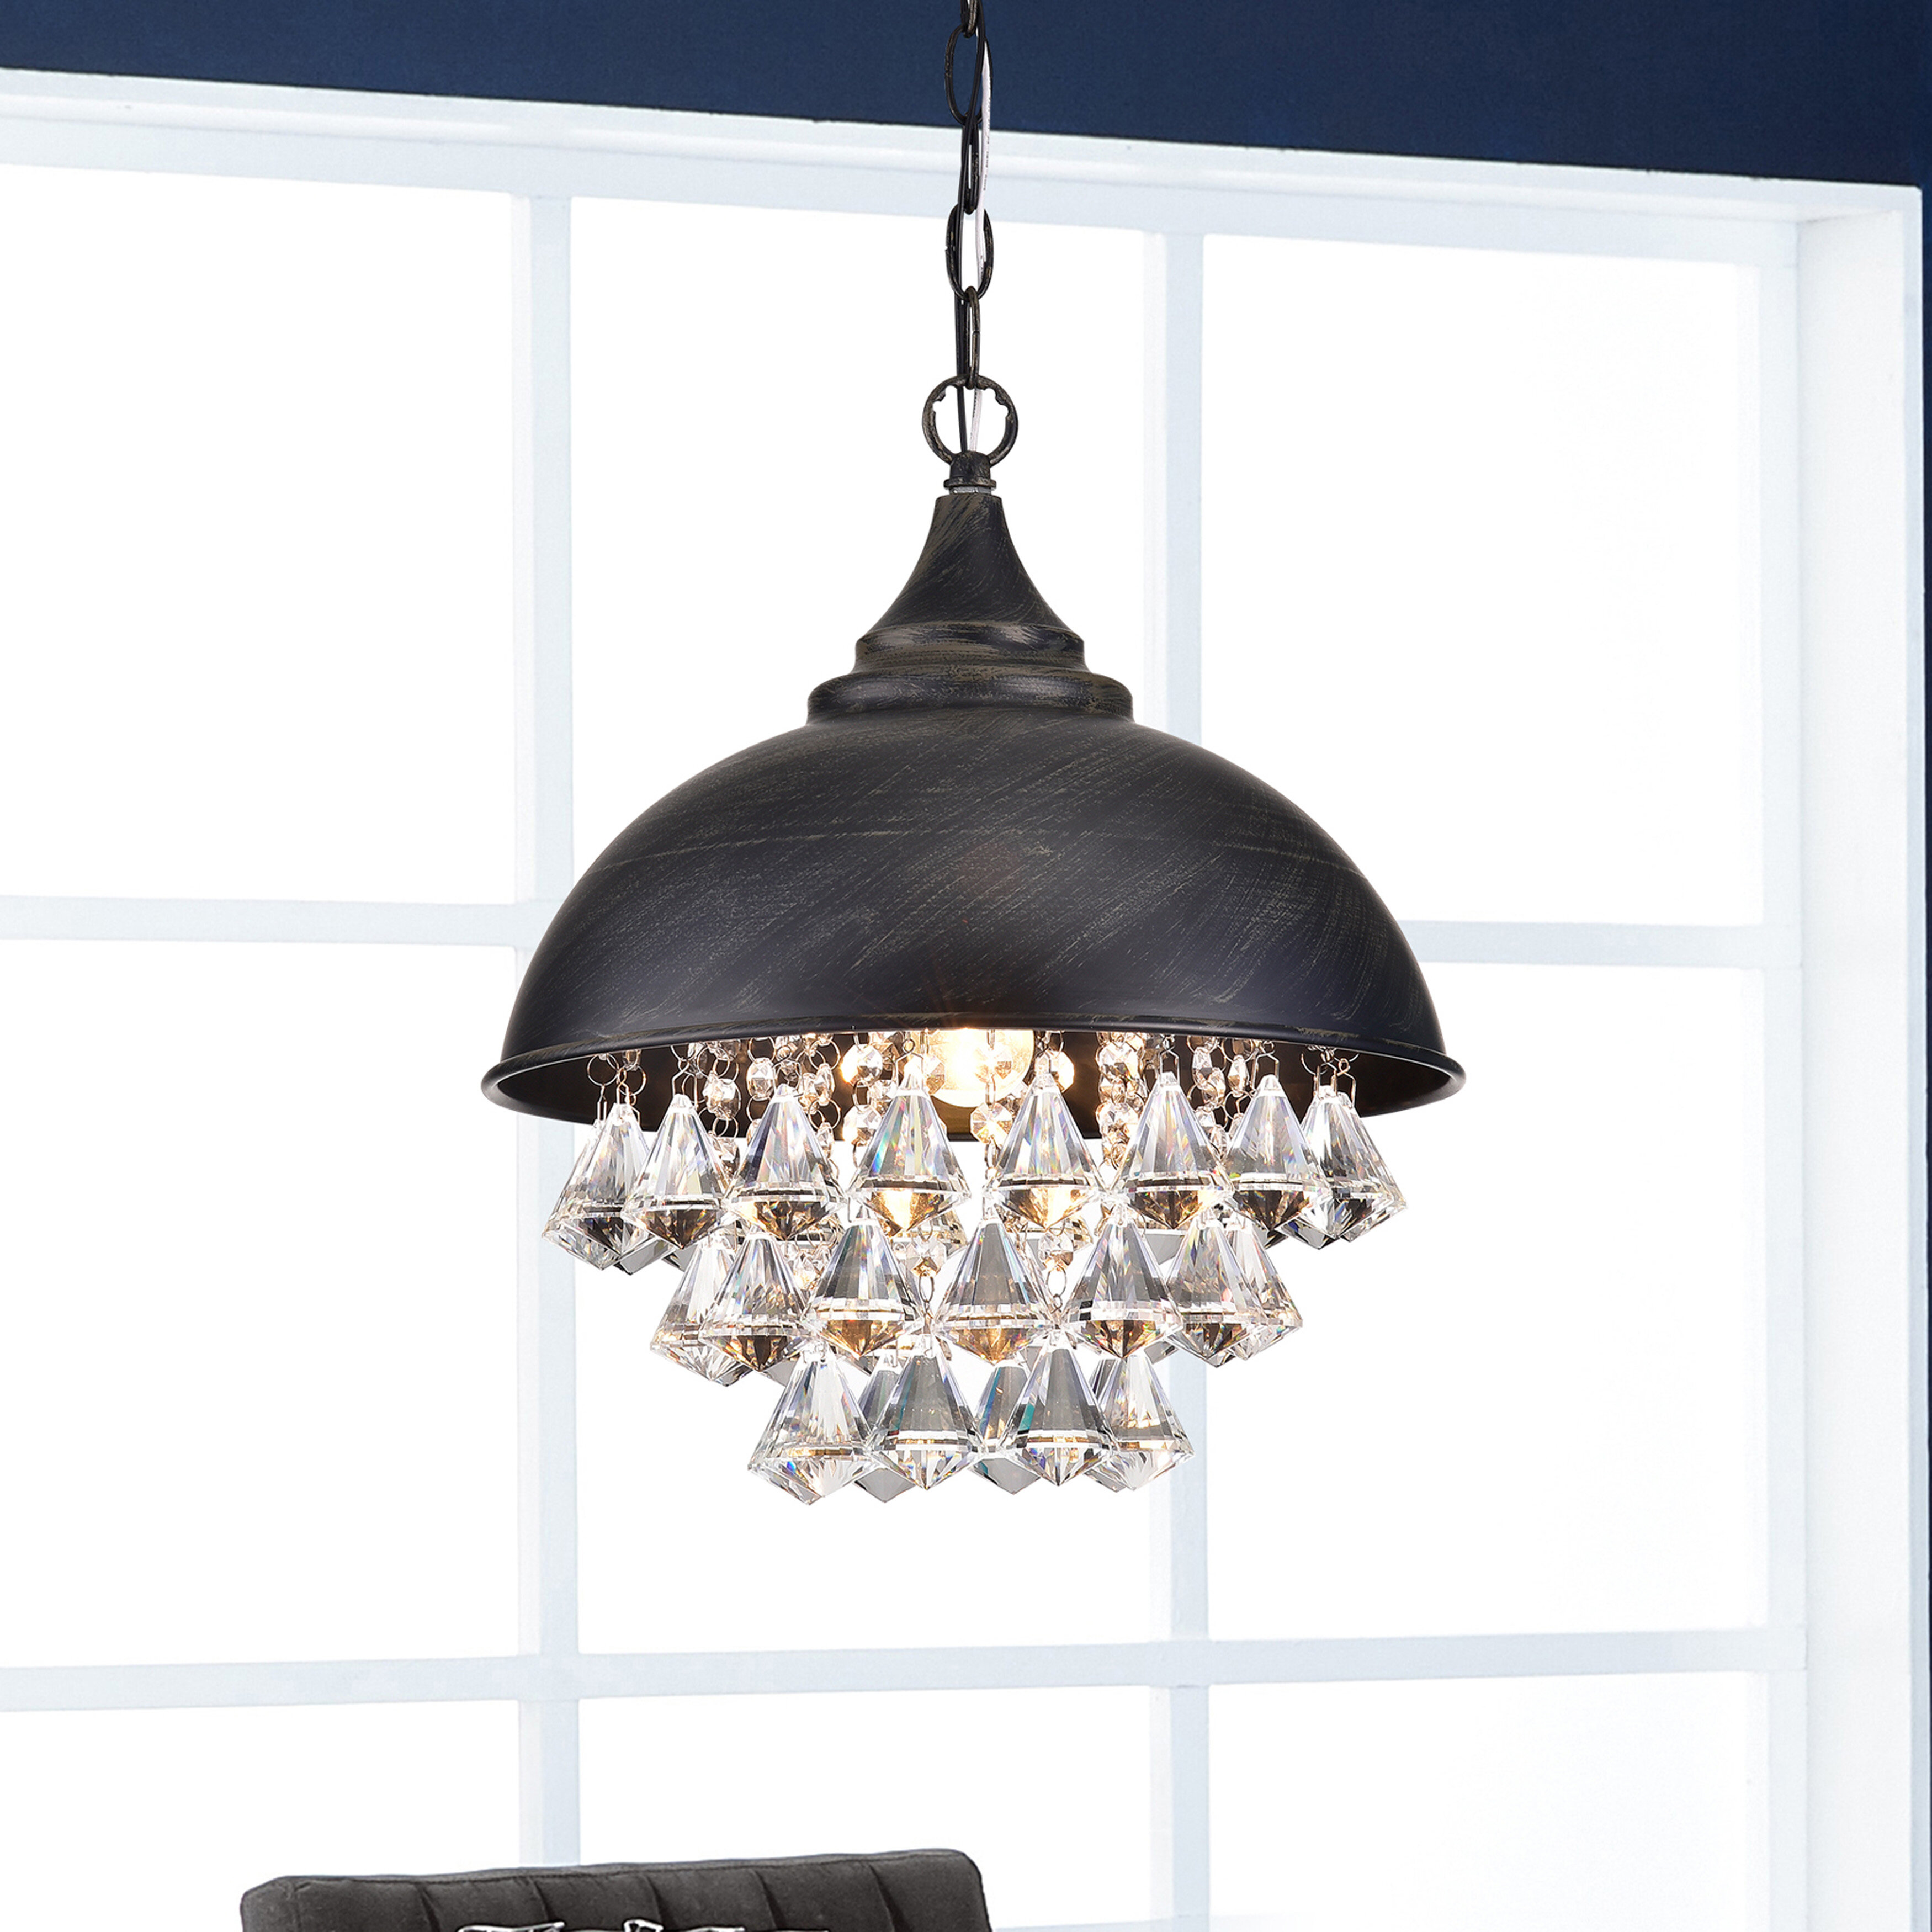 Wayfair Mini Or Small Chandeliers You Ll Love In 2021